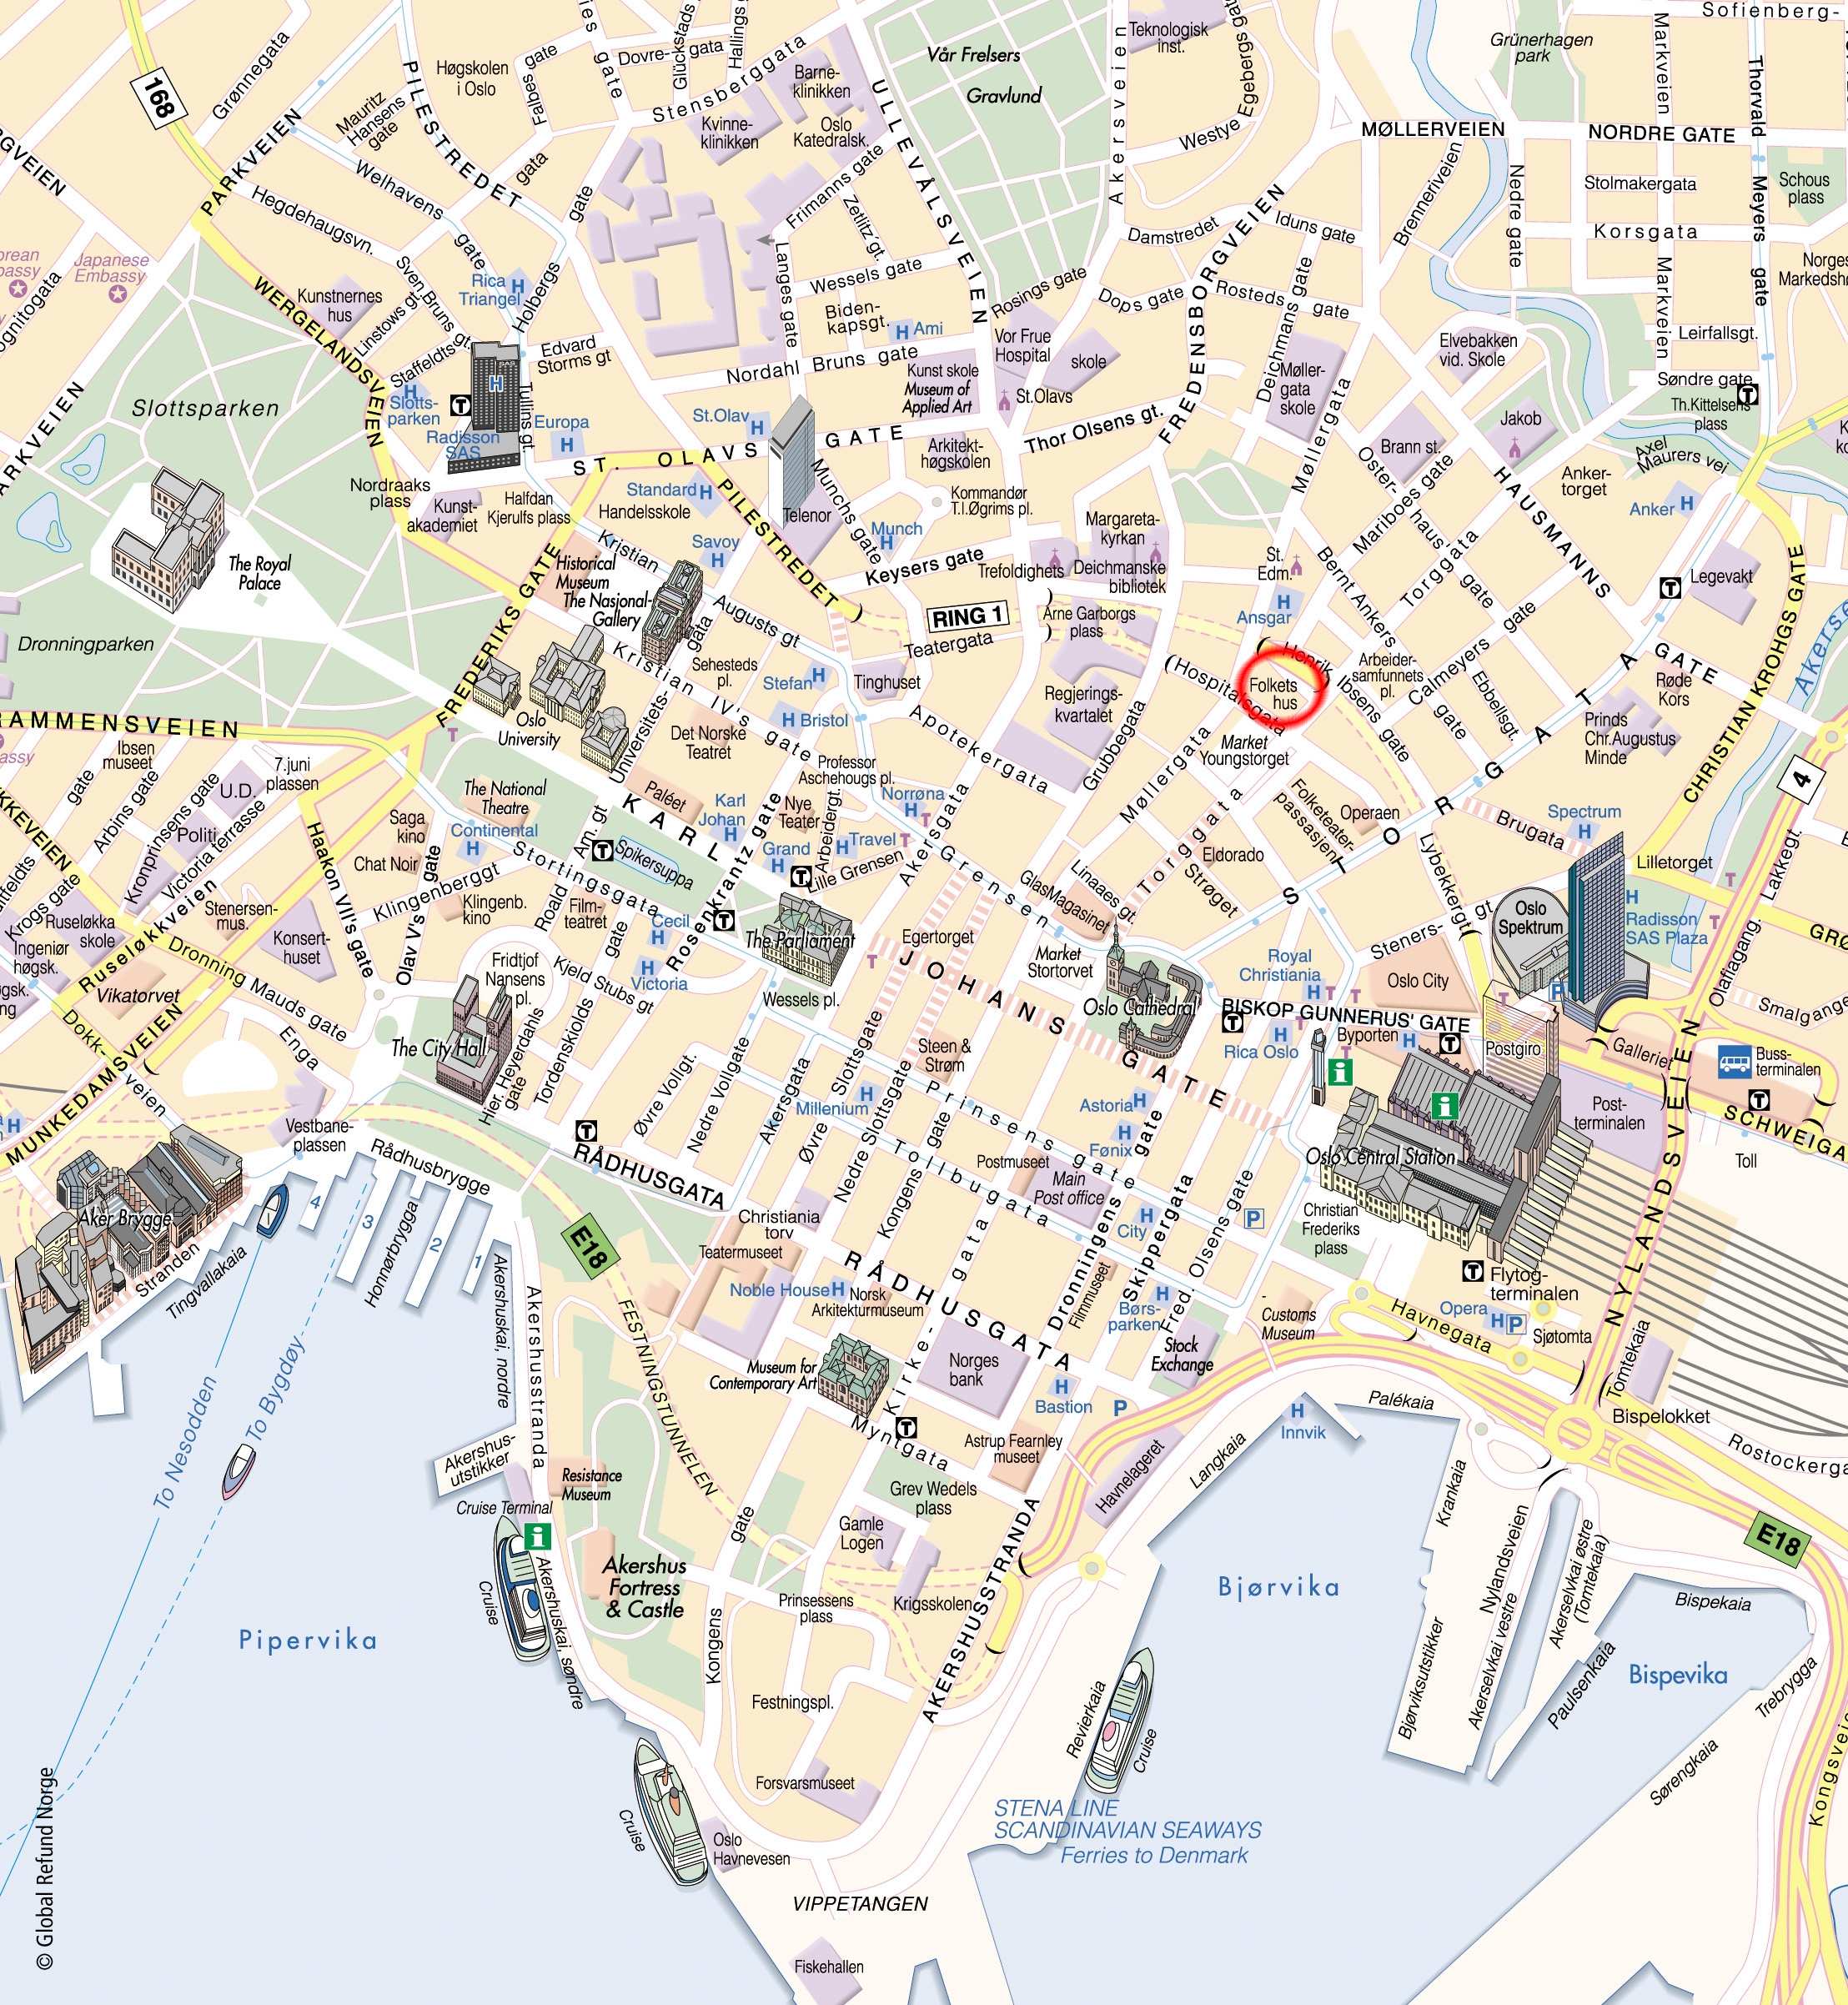 oslo karta Large Oslo Maps for Free Download and Print | High Resolution and  oslo karta